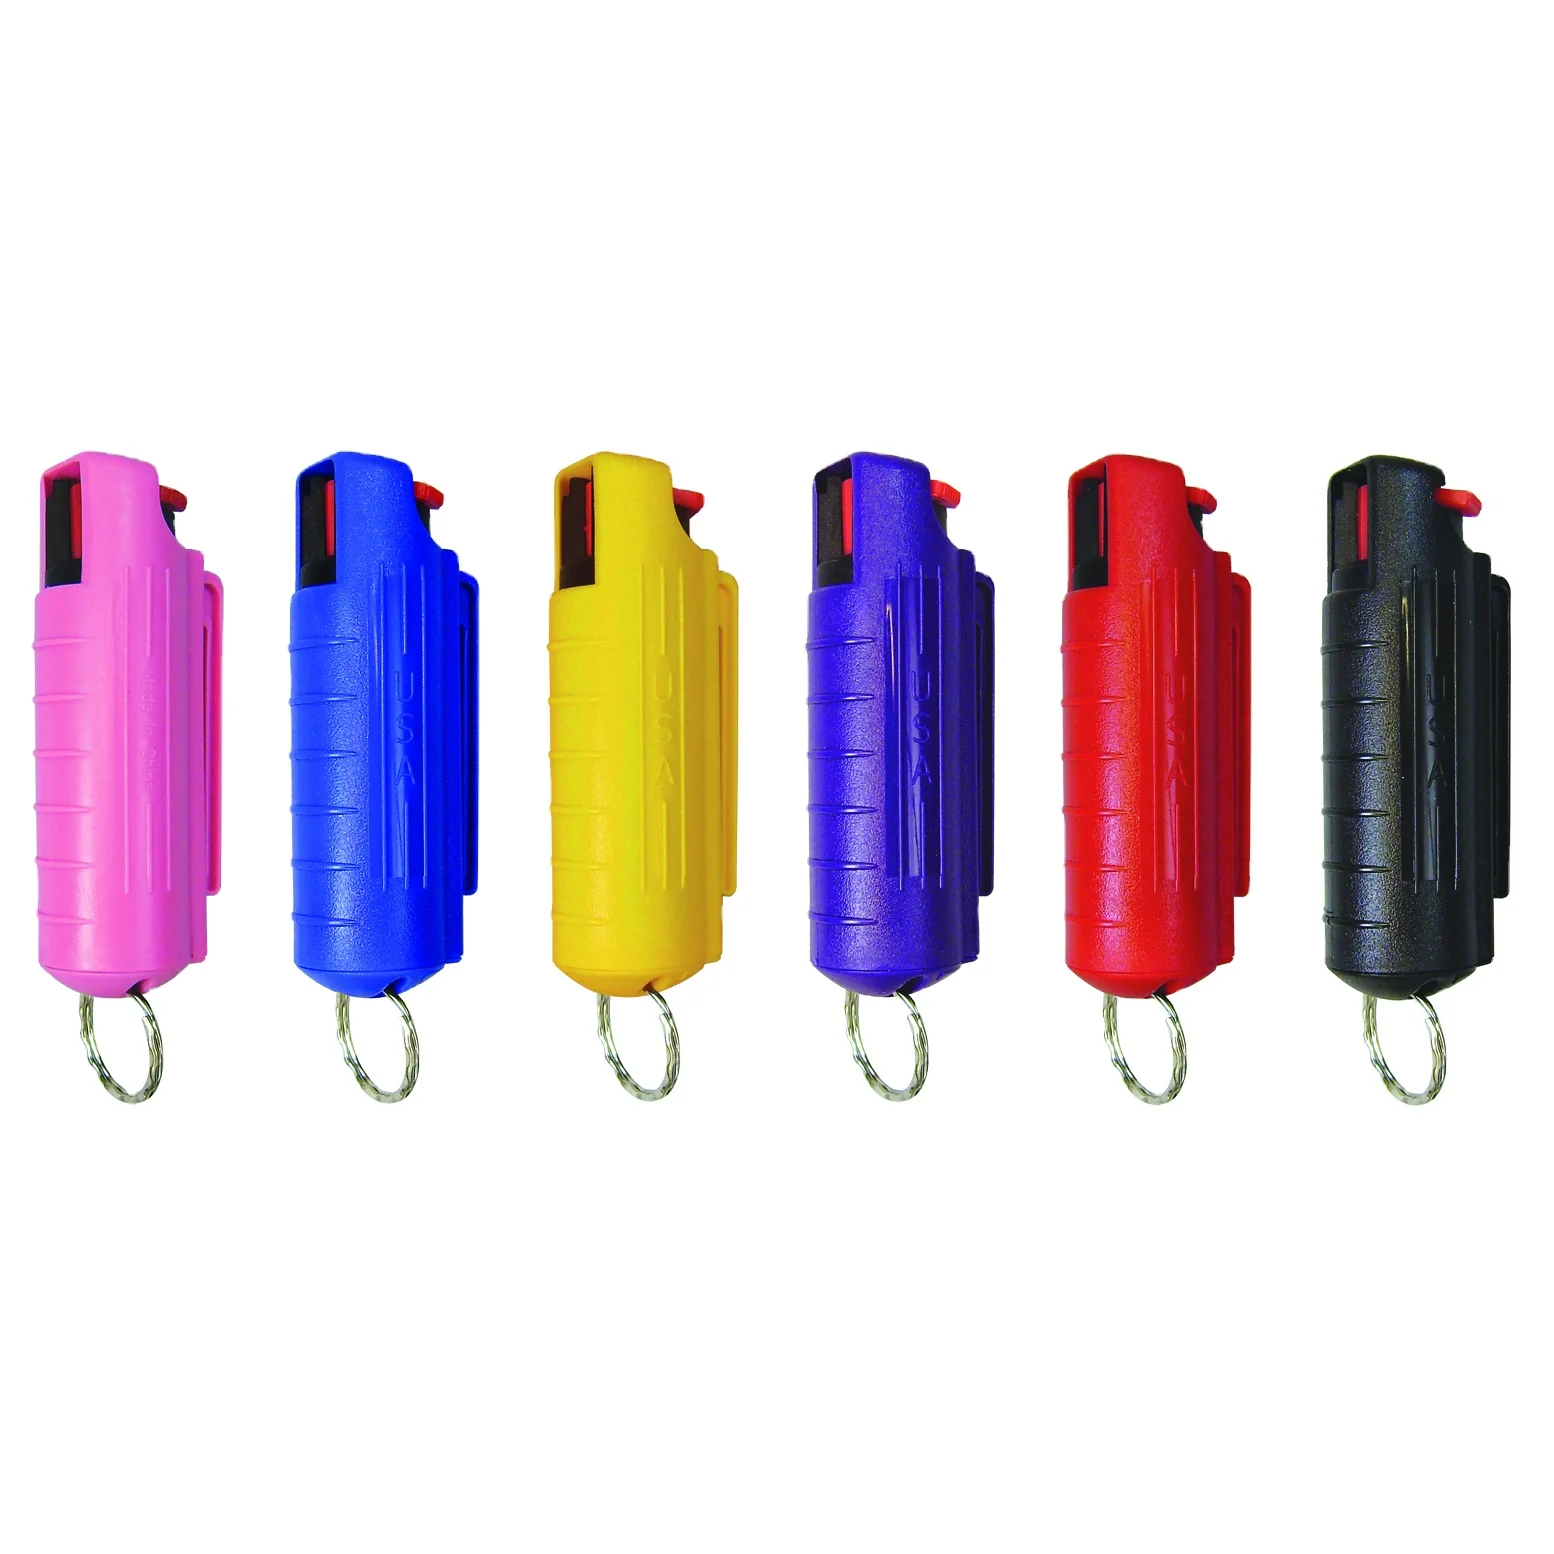 High quality plastic shell with 20ml pepper spray self defense product